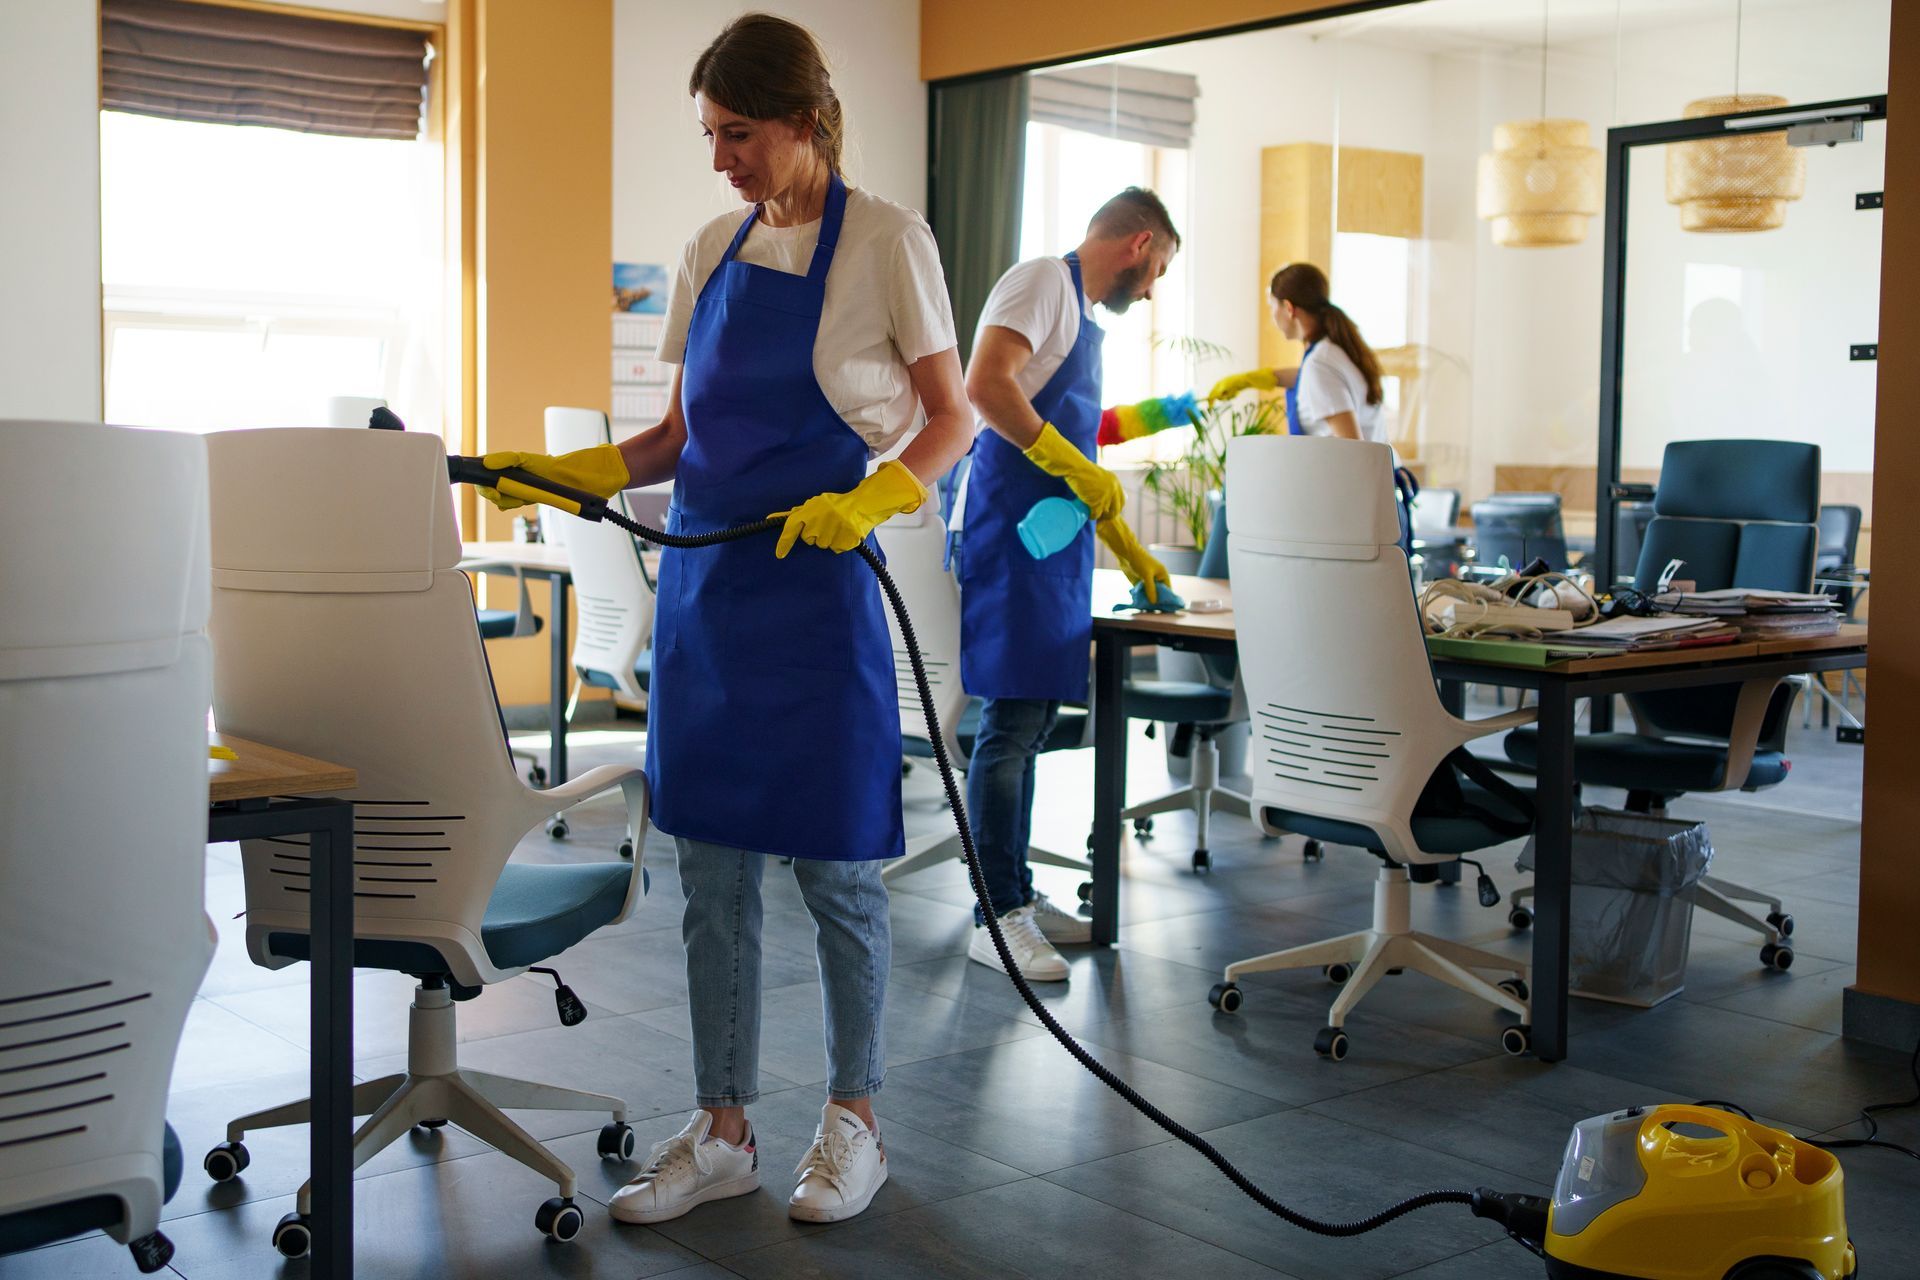 A man and a woman are cleaning an office with a vacuum cleaner.